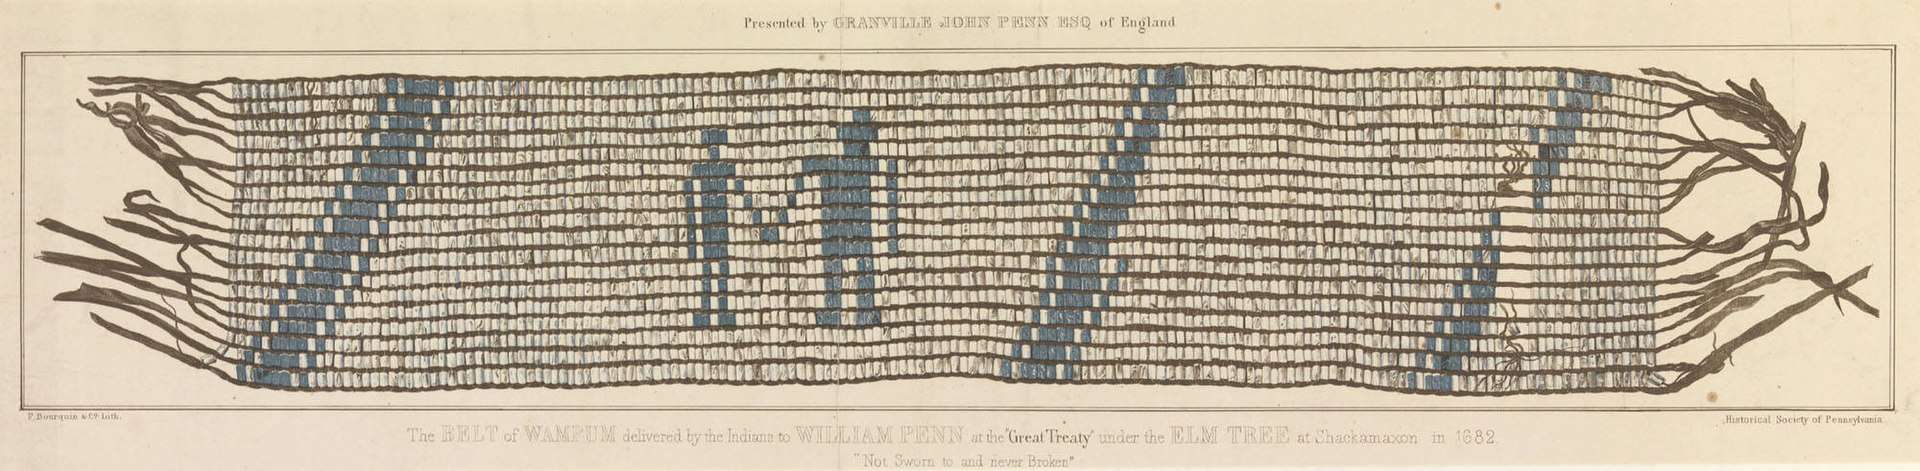 The belt of wampum delivered by the Indians to William Penn at the 